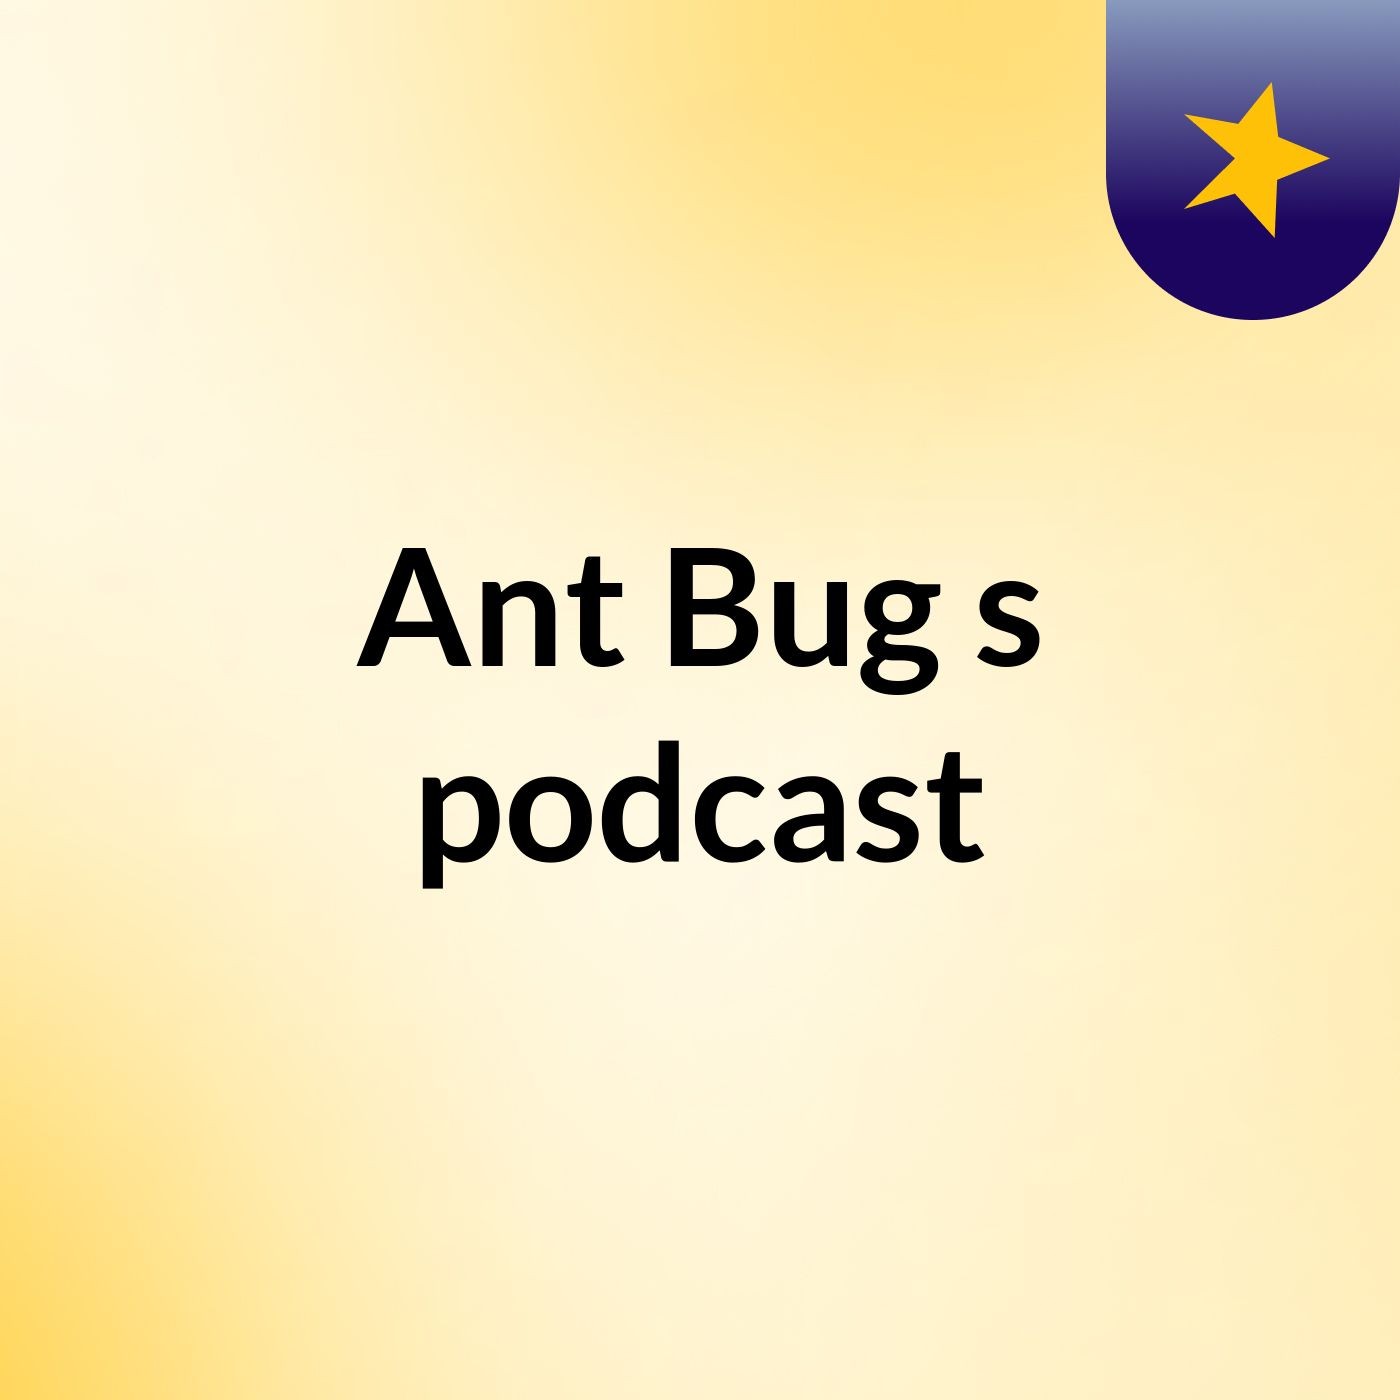 Episode 6 - Ant Bug's podcast